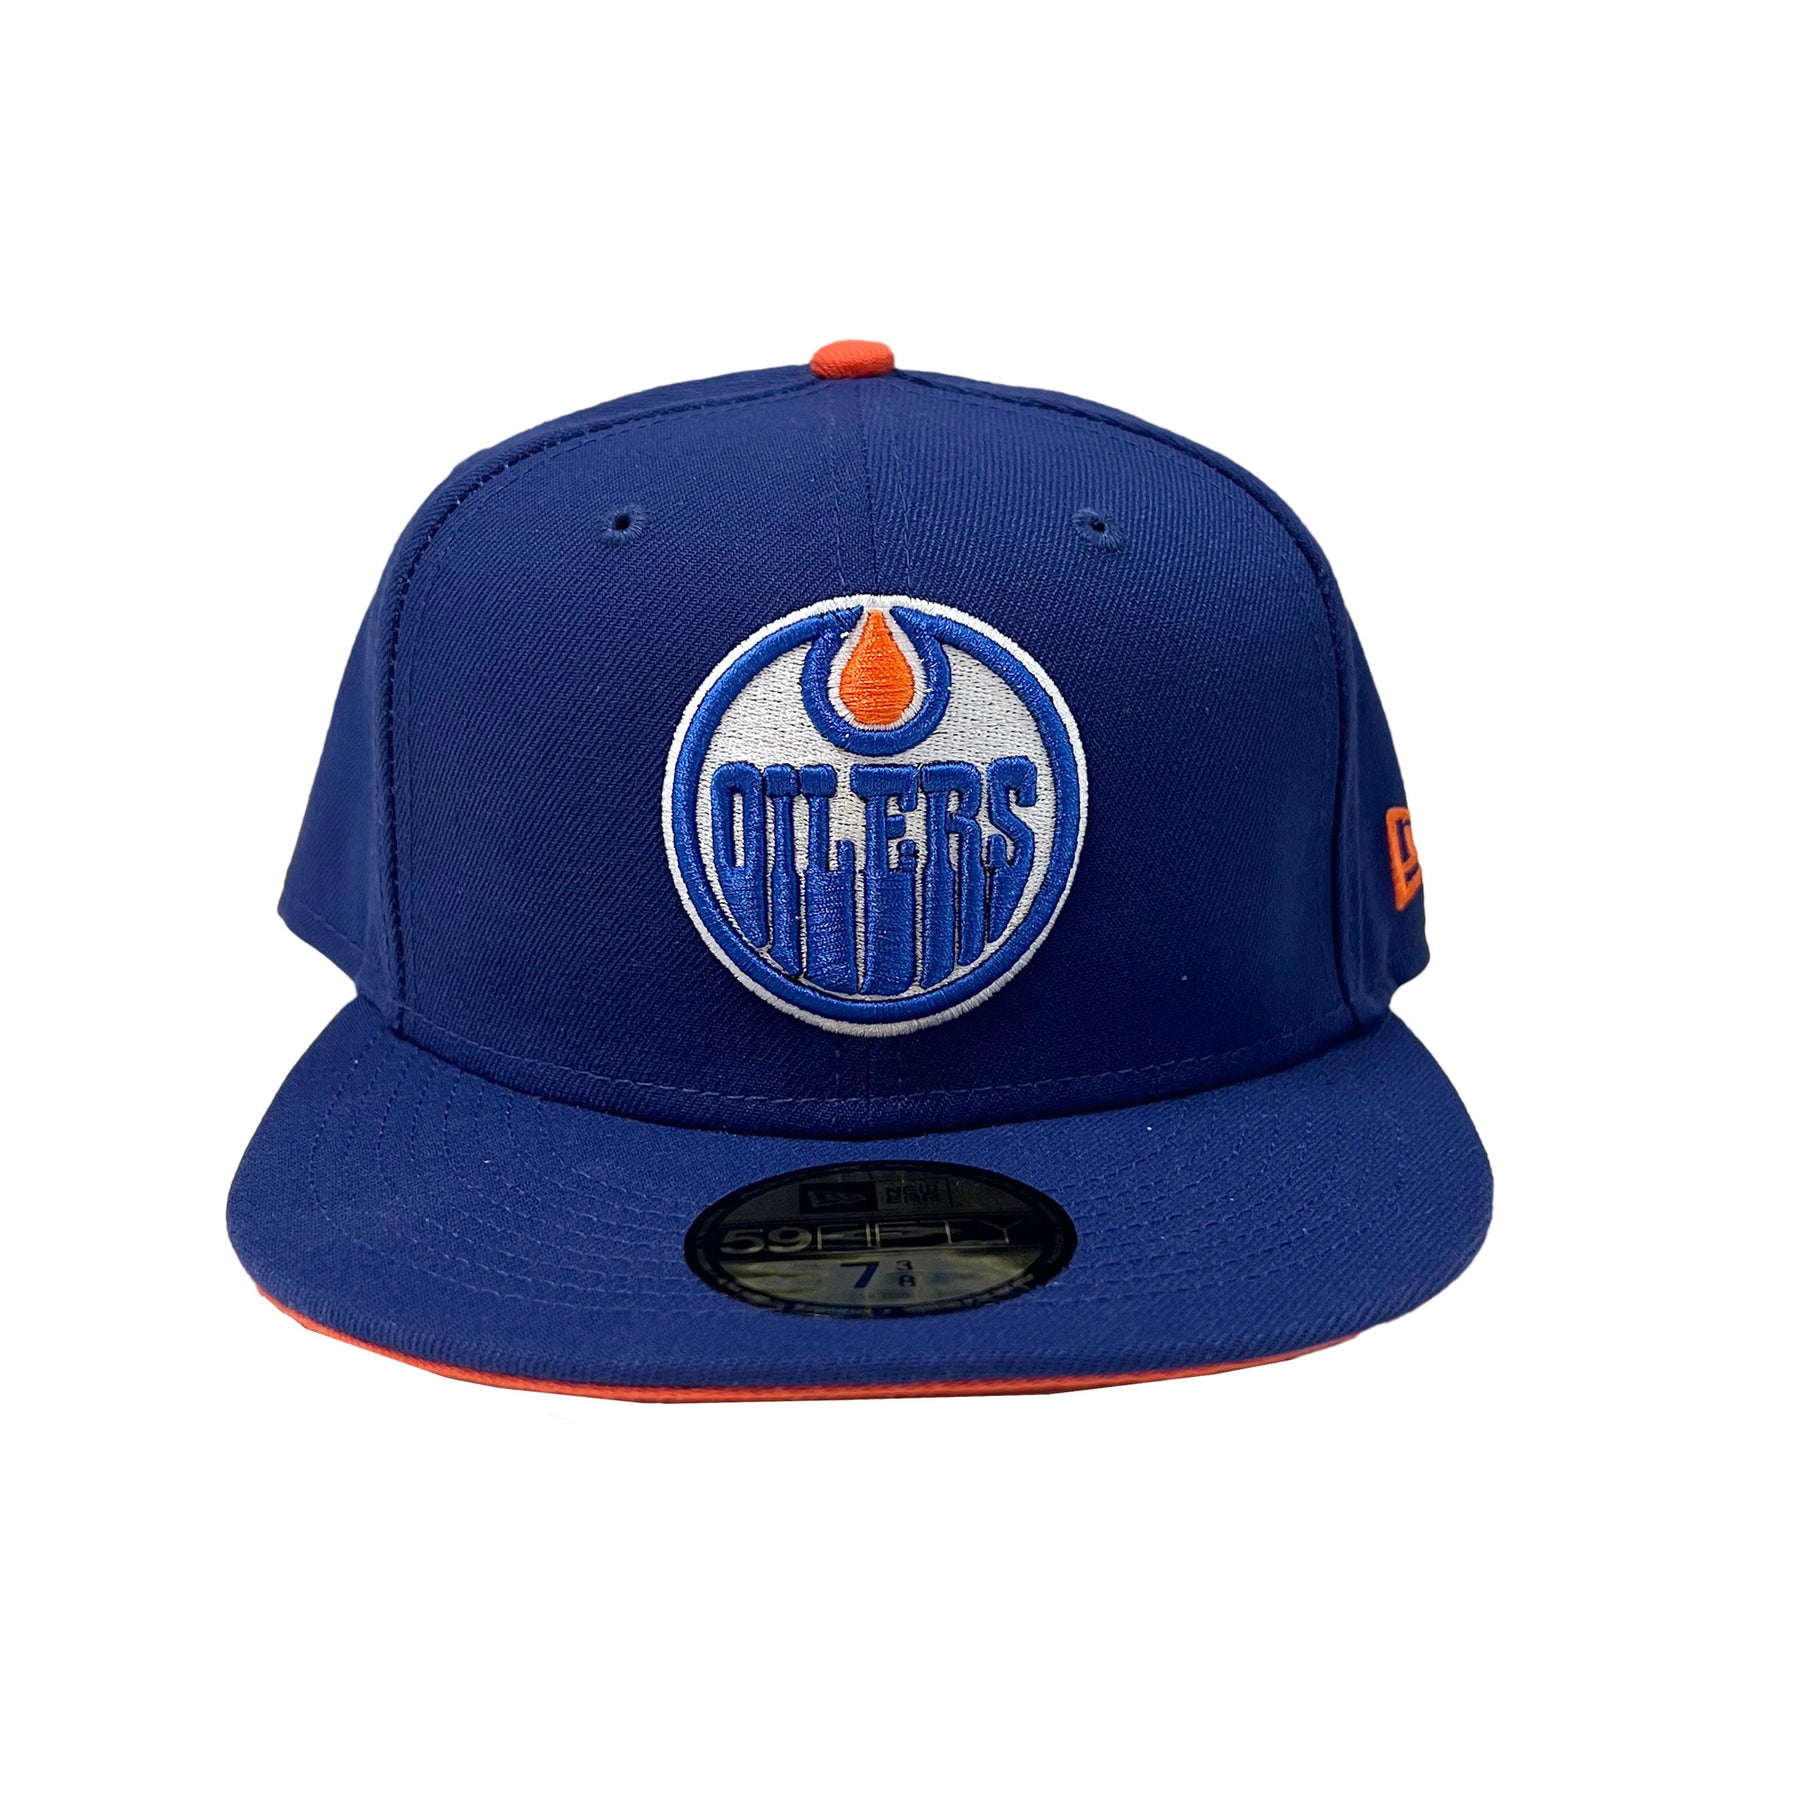 Edmonton Oilers New Era Black & White 59FIFTY Fitted Logo Hat